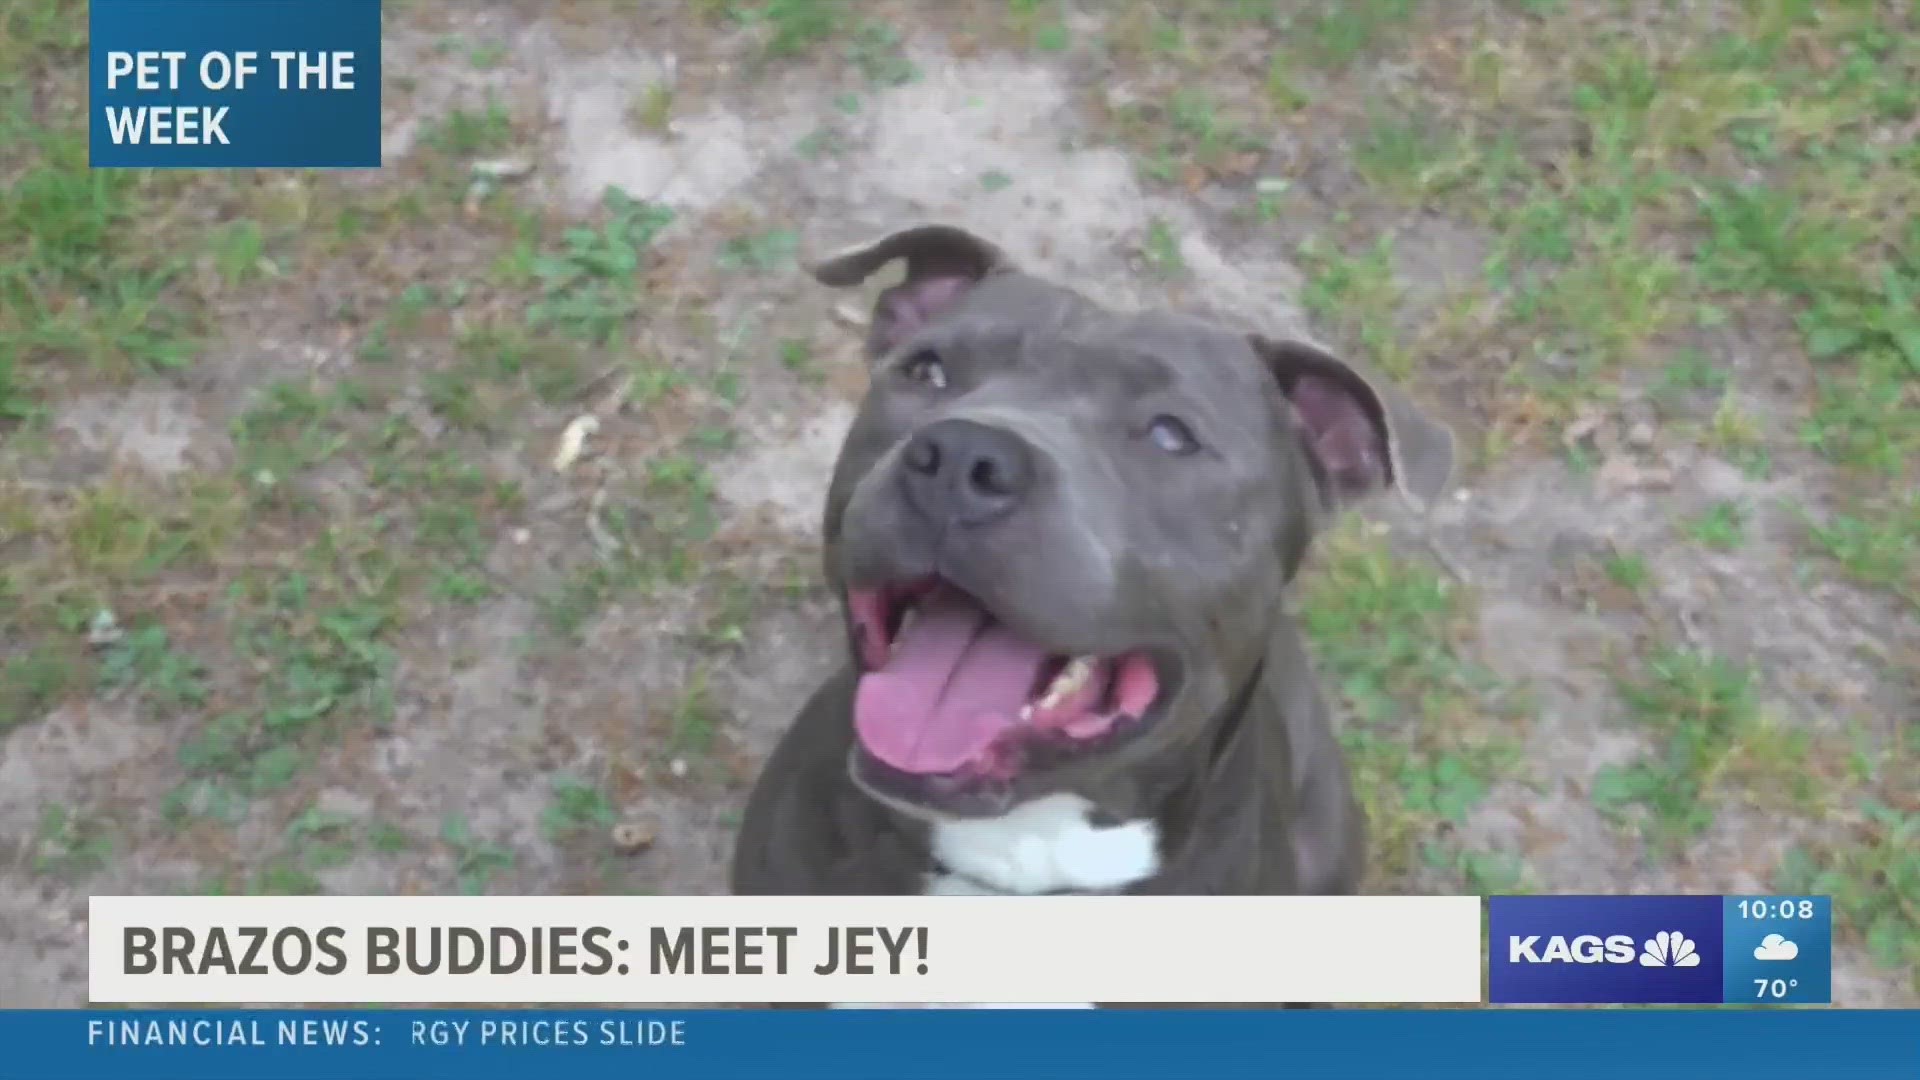 This week's featured Brazos Buddy is Jey, a four-year-old Pit Bull mix that's looking to be adopted.